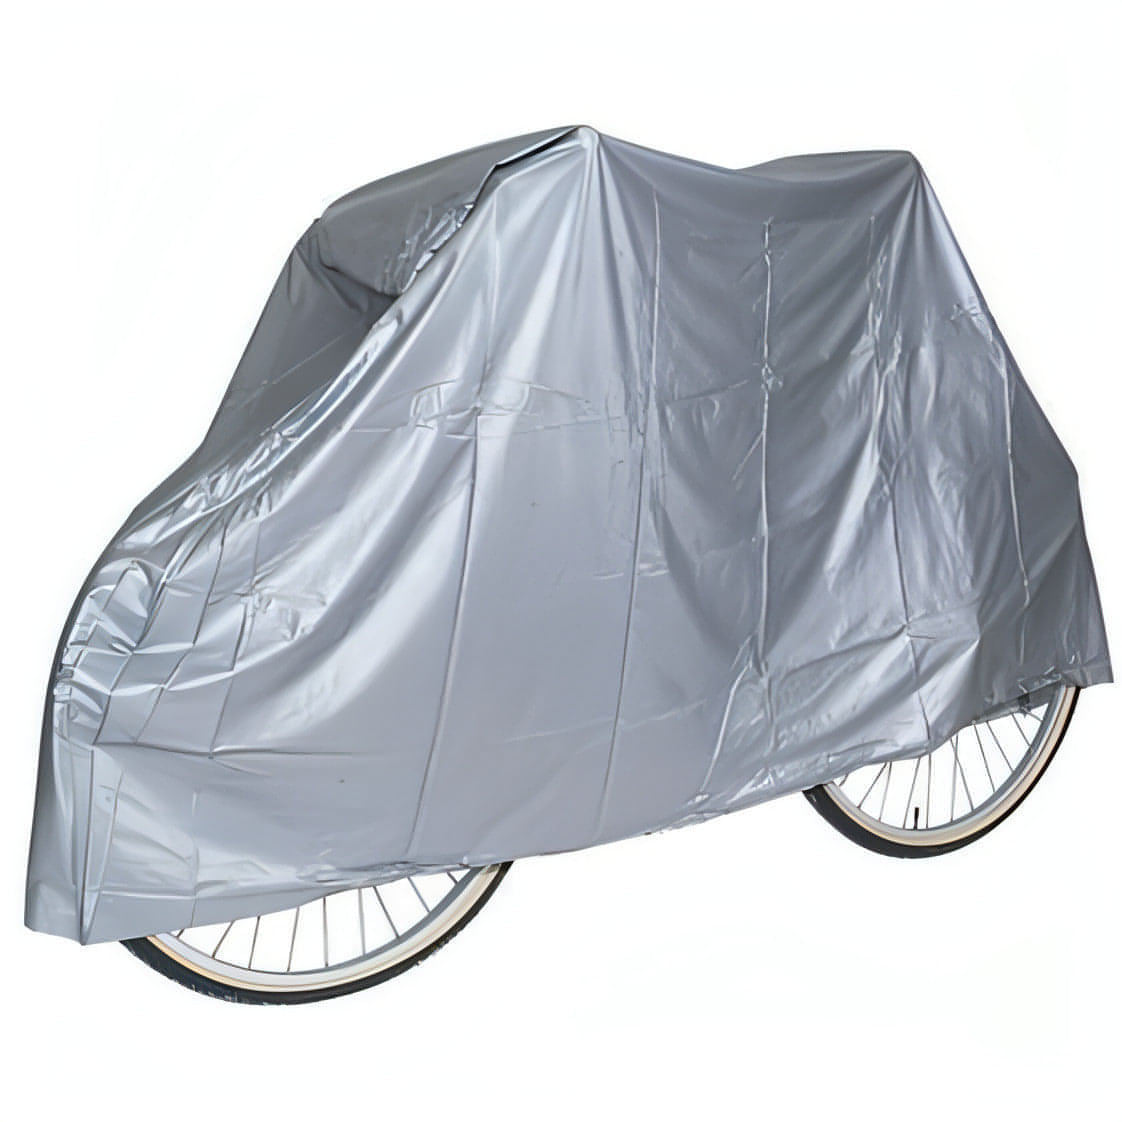 More Mile Waterproof Bicycle Cover - Silver 5055604329946 - Start Fitness